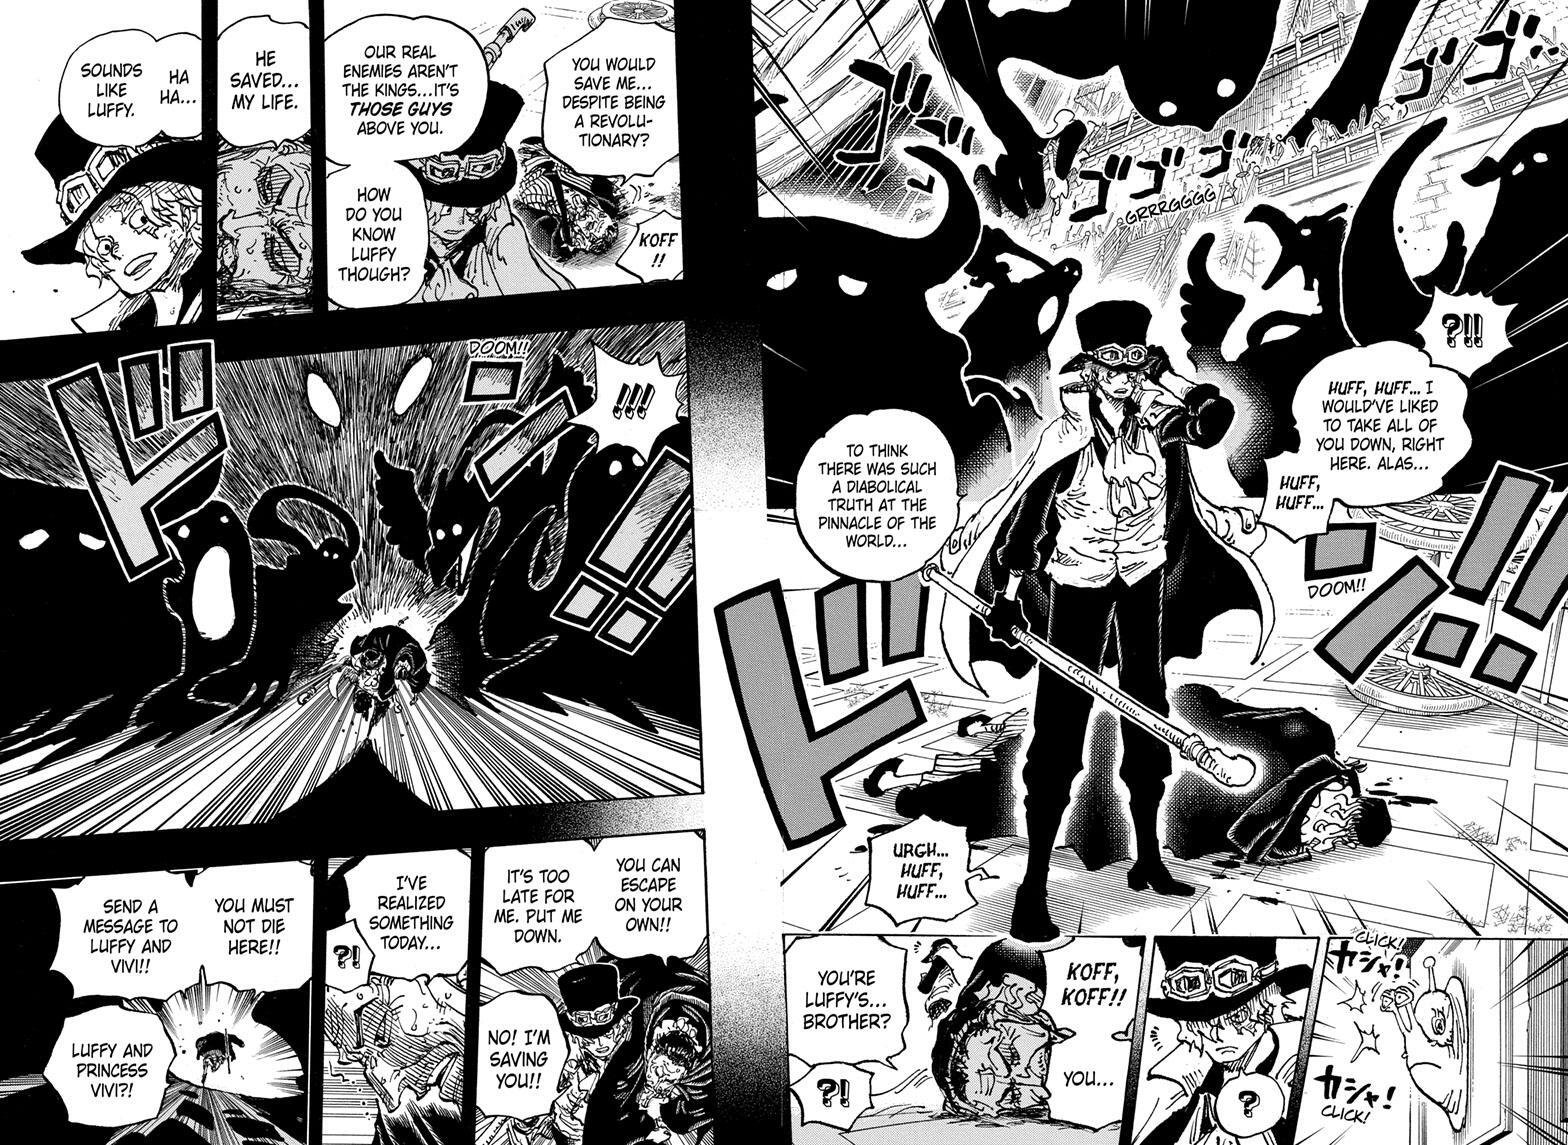 One Piece 1094 Spoilers: Do all Five Elders Have Yokai-Themed